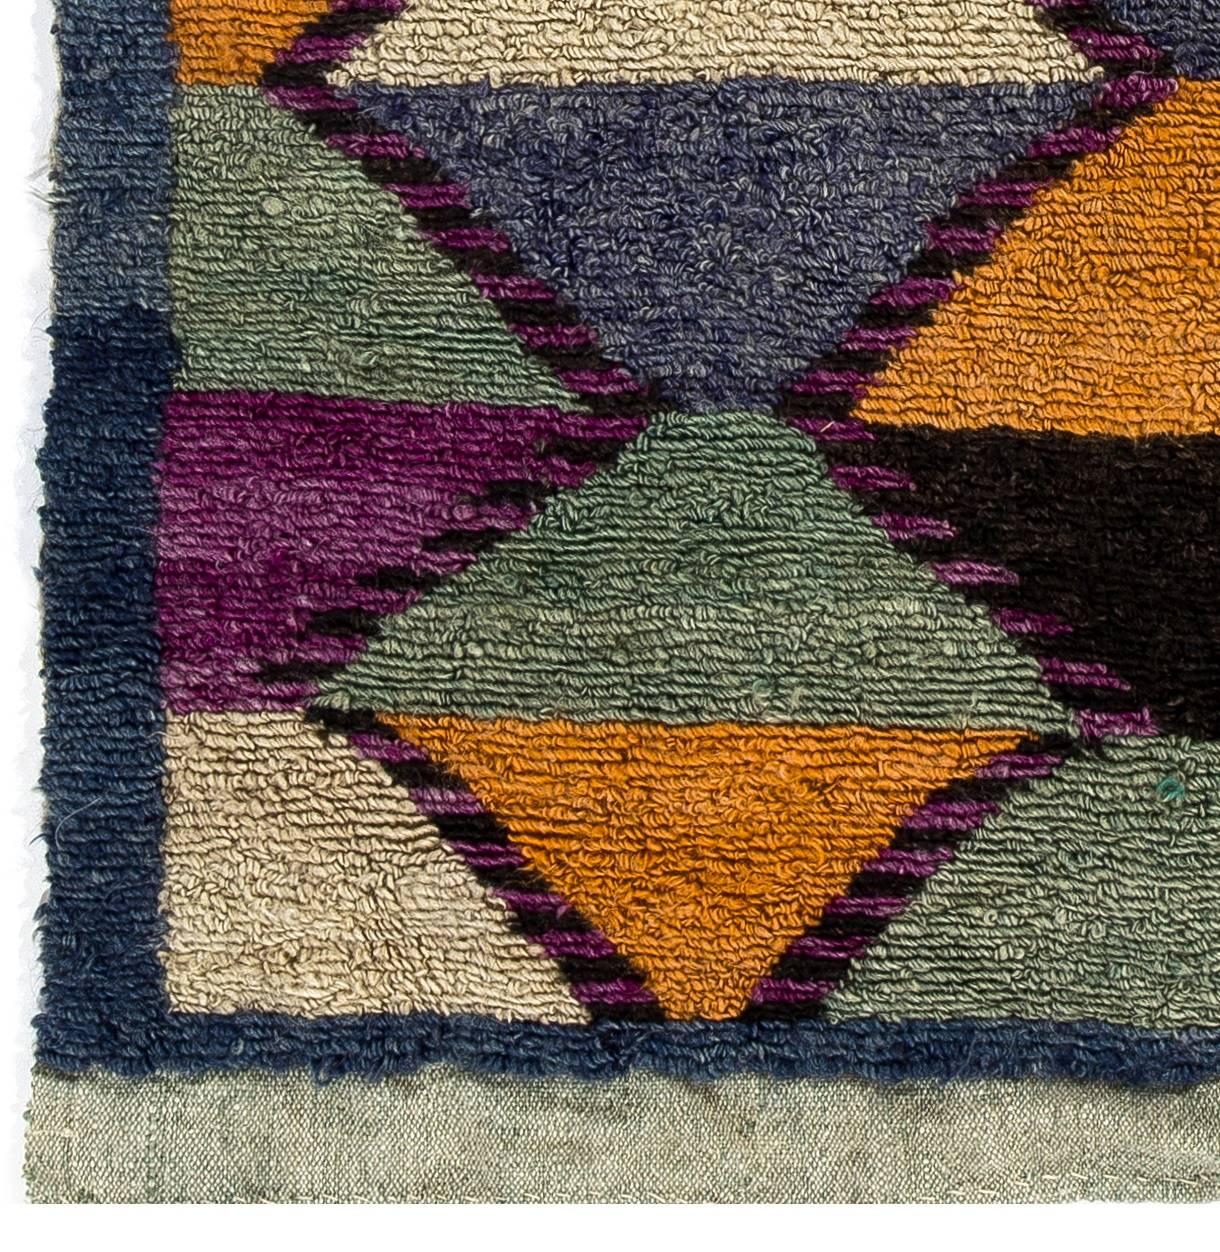 A vintage hand-knotted TULU (Turkish word for thick piled) rug from Konya in Central Anatolia, Turkey. These charming small rugs with simple and somewhat contemporary designs with lustrous wool pile were produced for daily use by villagers in Konya